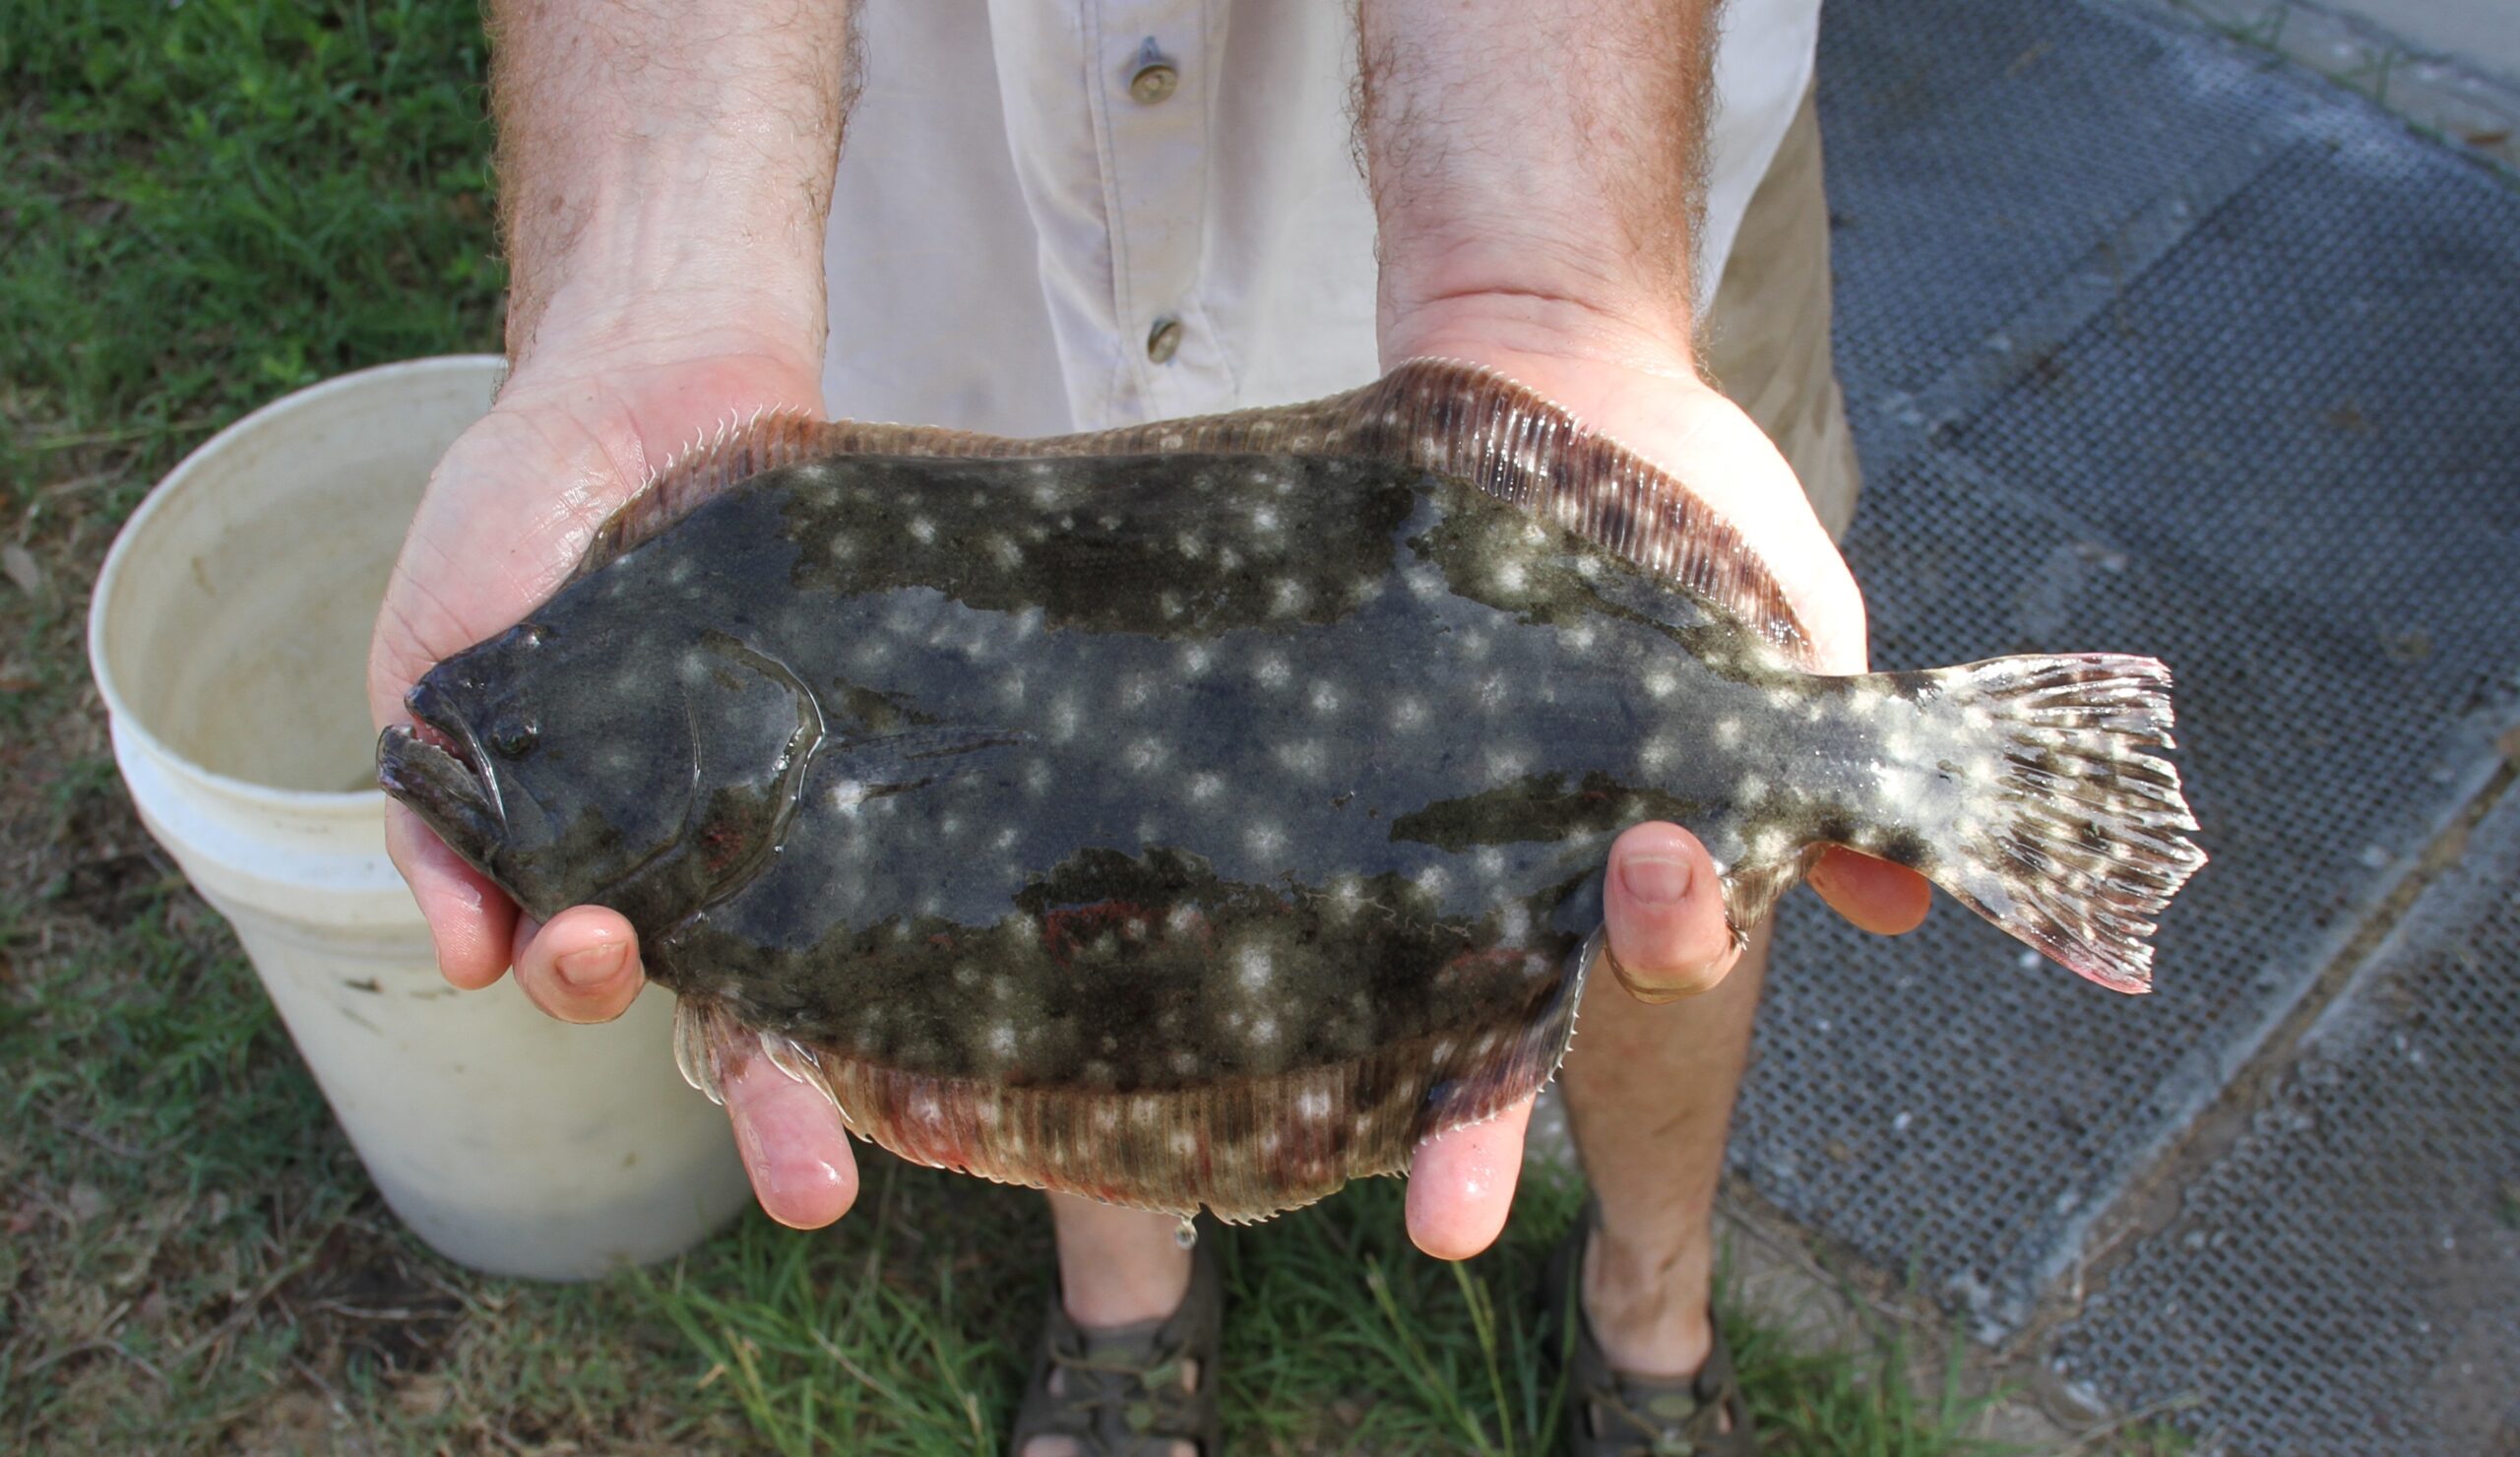 Texas and other coastal states are enacting temporary closures to the flounder fishing season in response to declining populations throughout the flounder's native range.